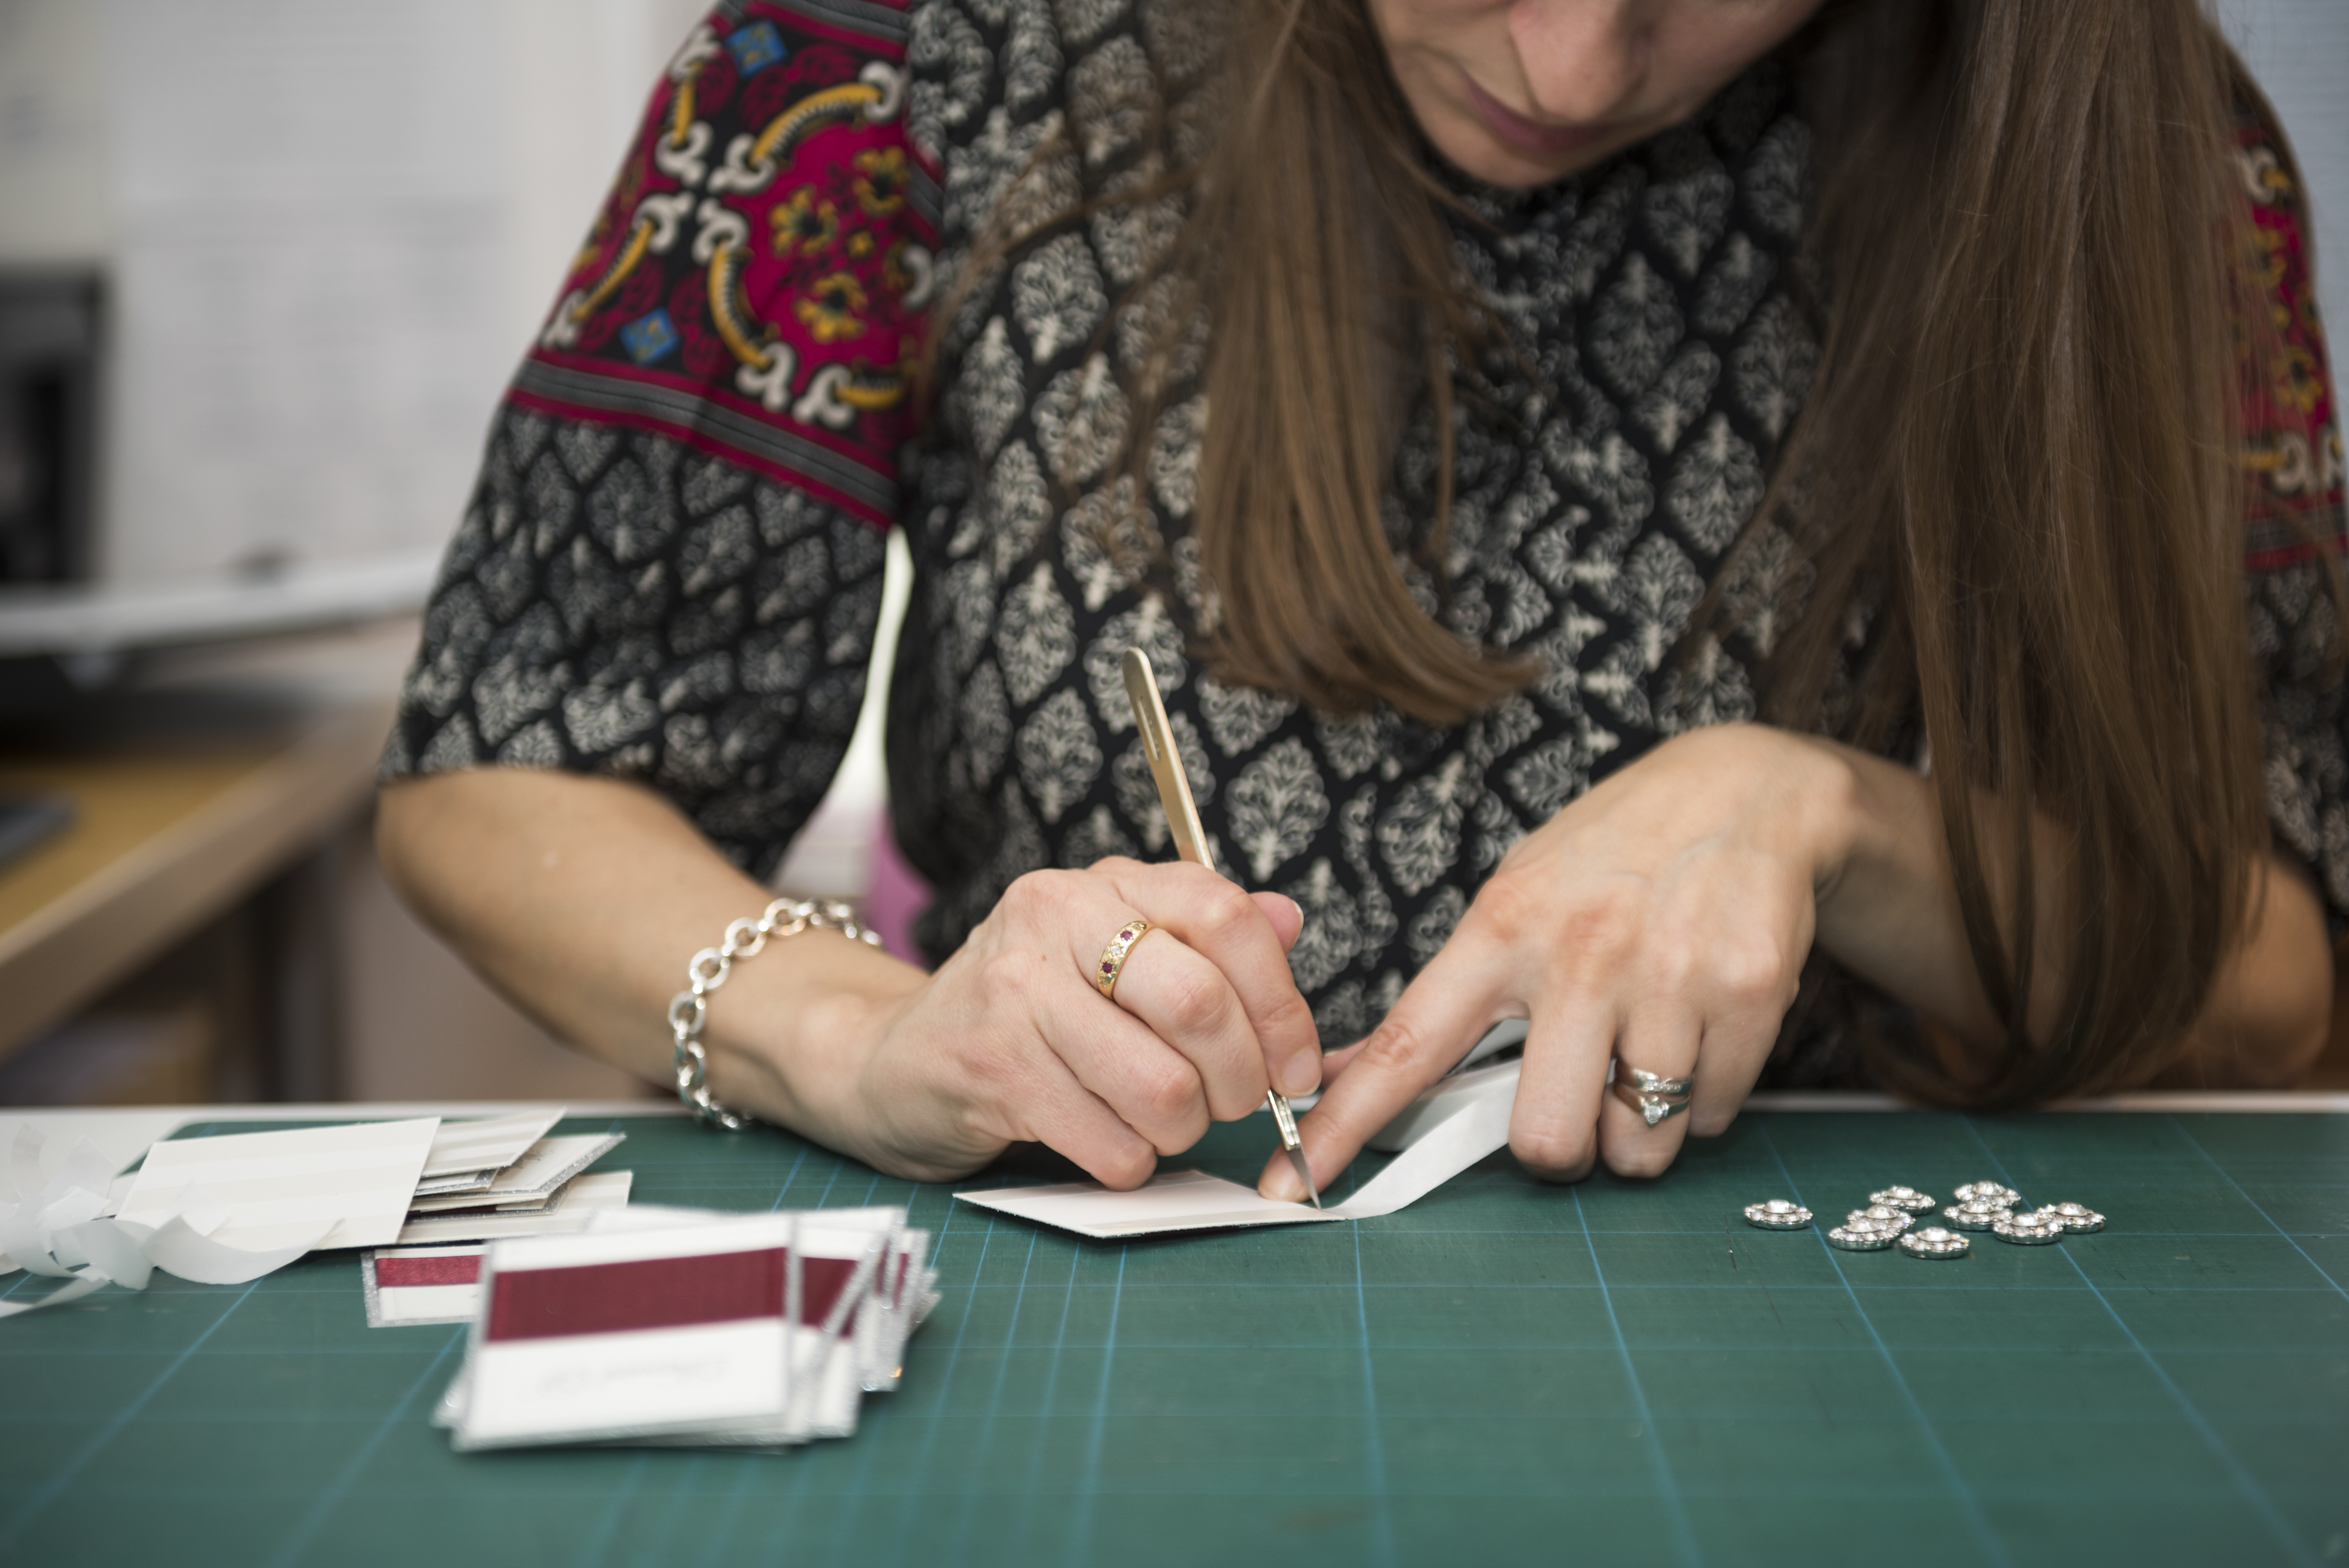 Lisa making place cards and wedding stationery Inspired by Lisa